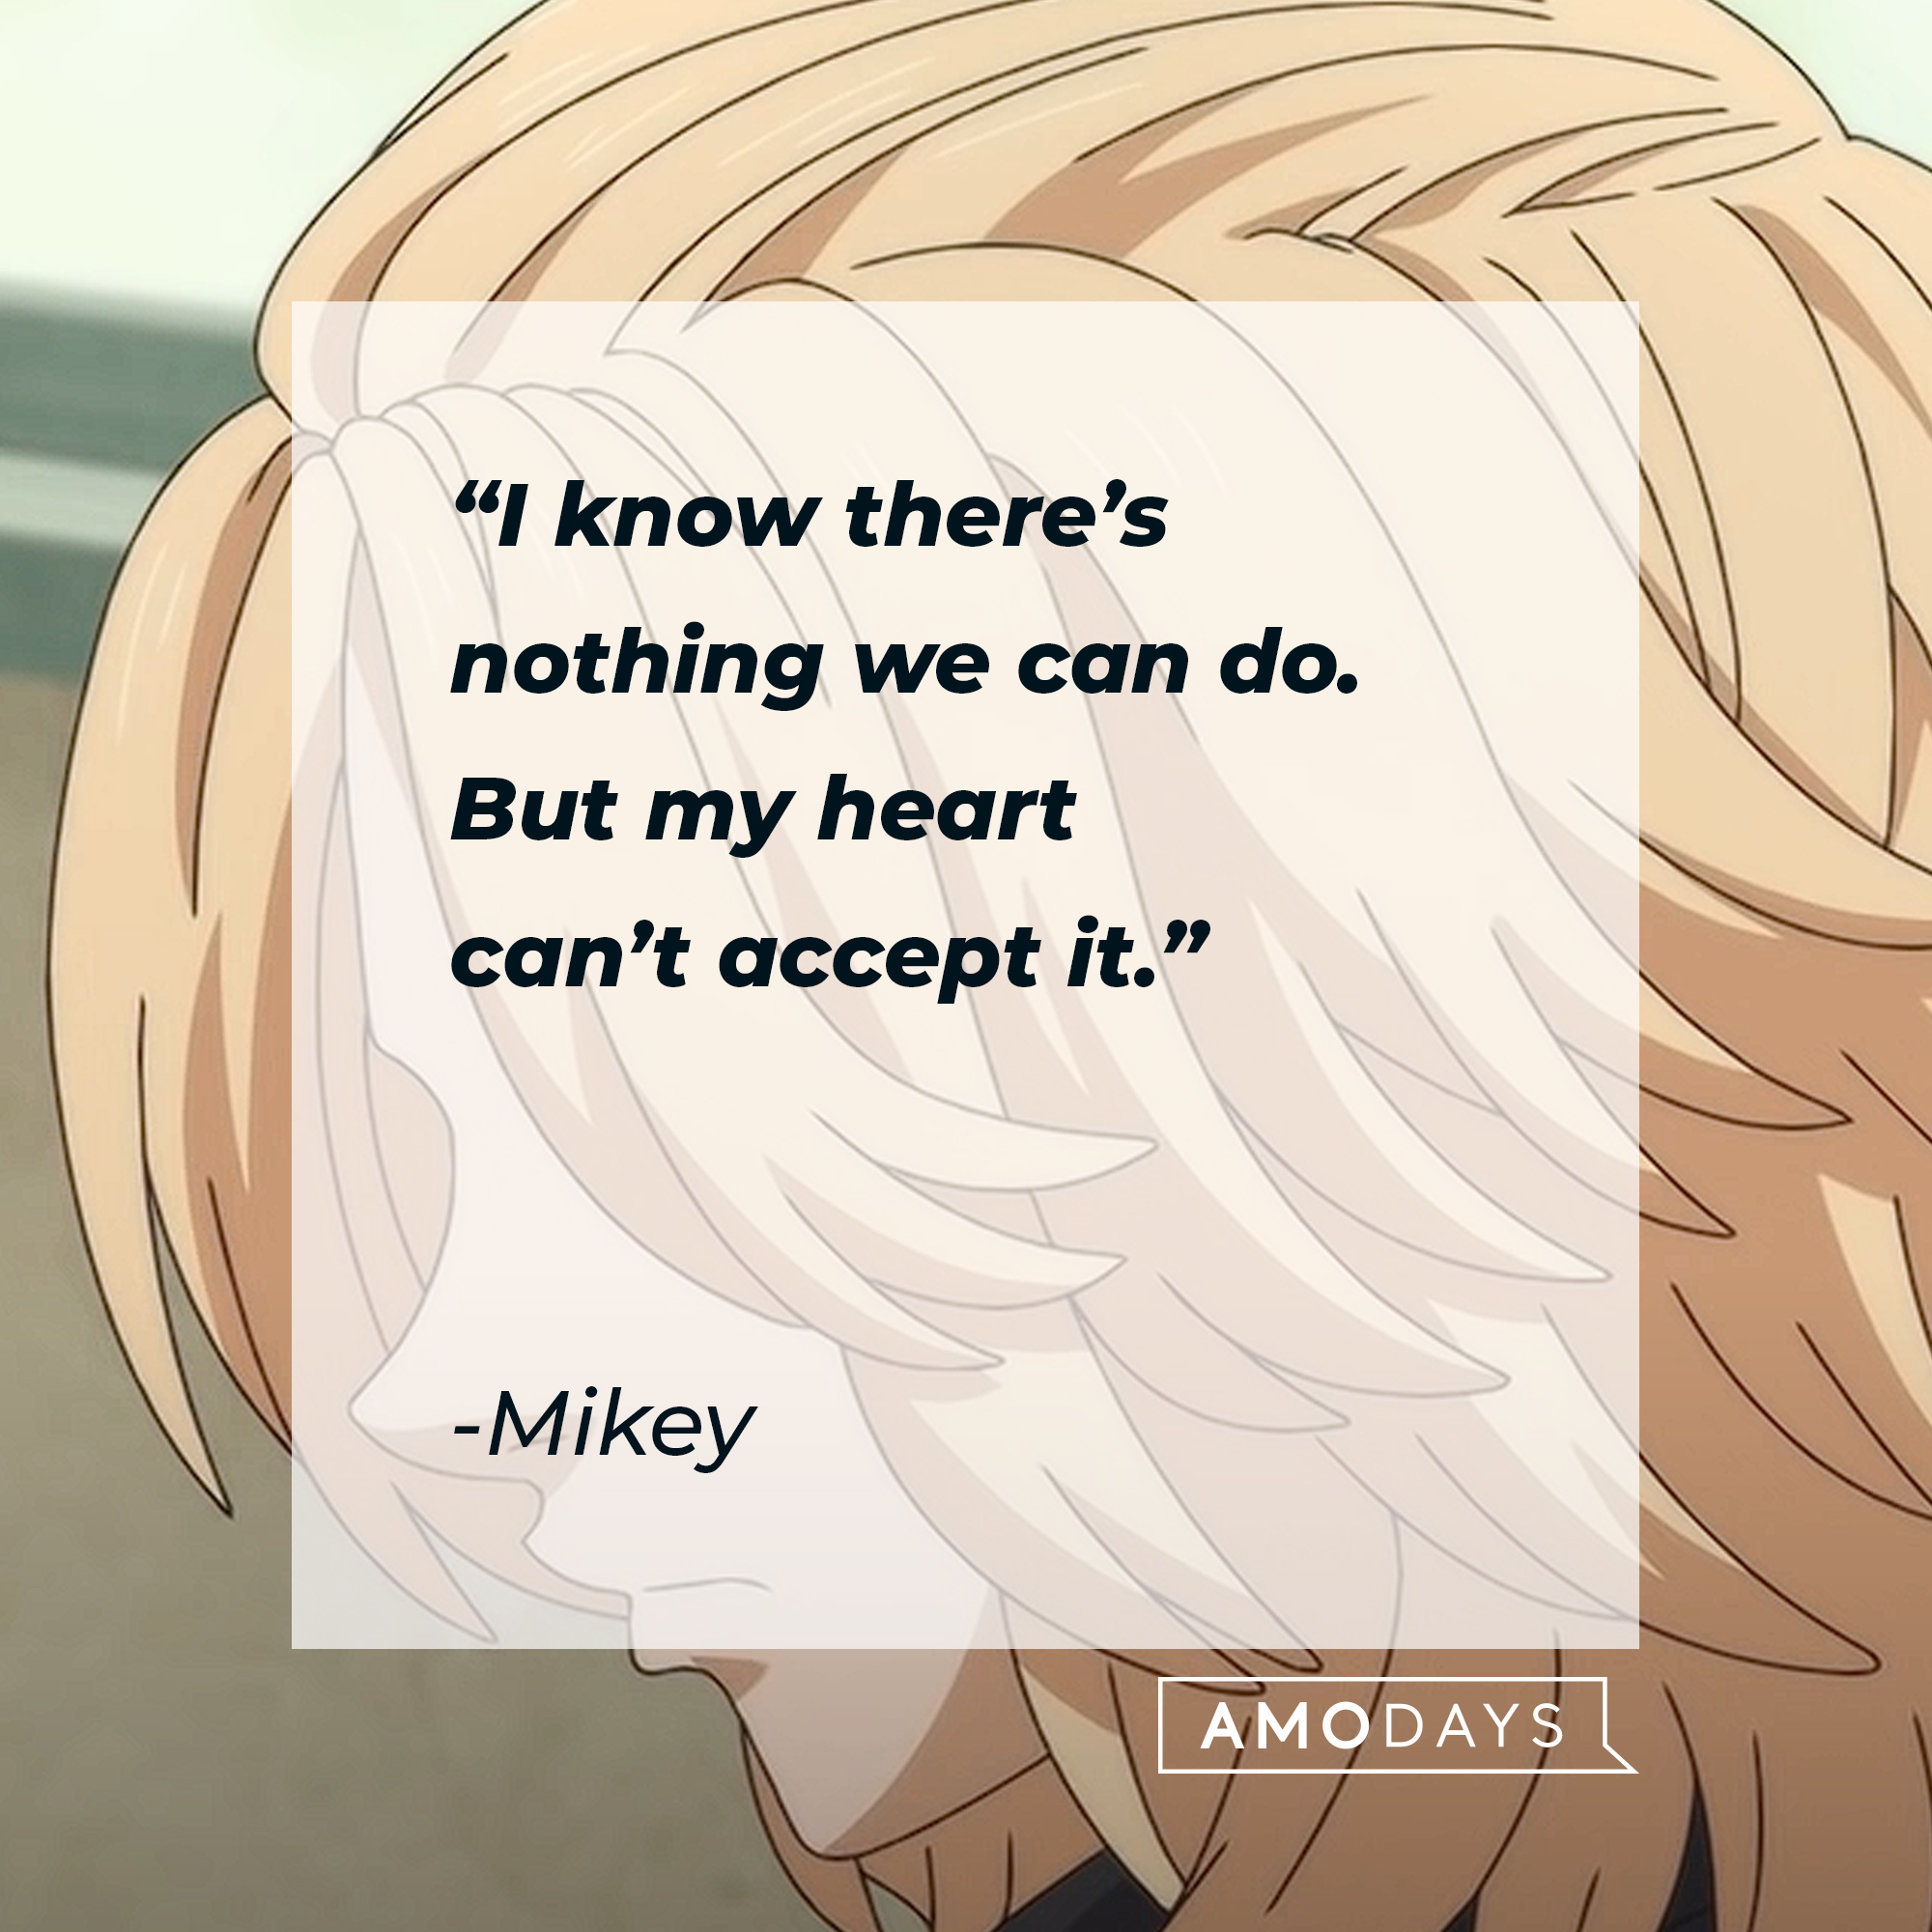 An image of Mikey with his quote: “I know there’s nothing we can do. But my heart can’t accept it.” | Source: youtube.com/CrunchyrollCollection